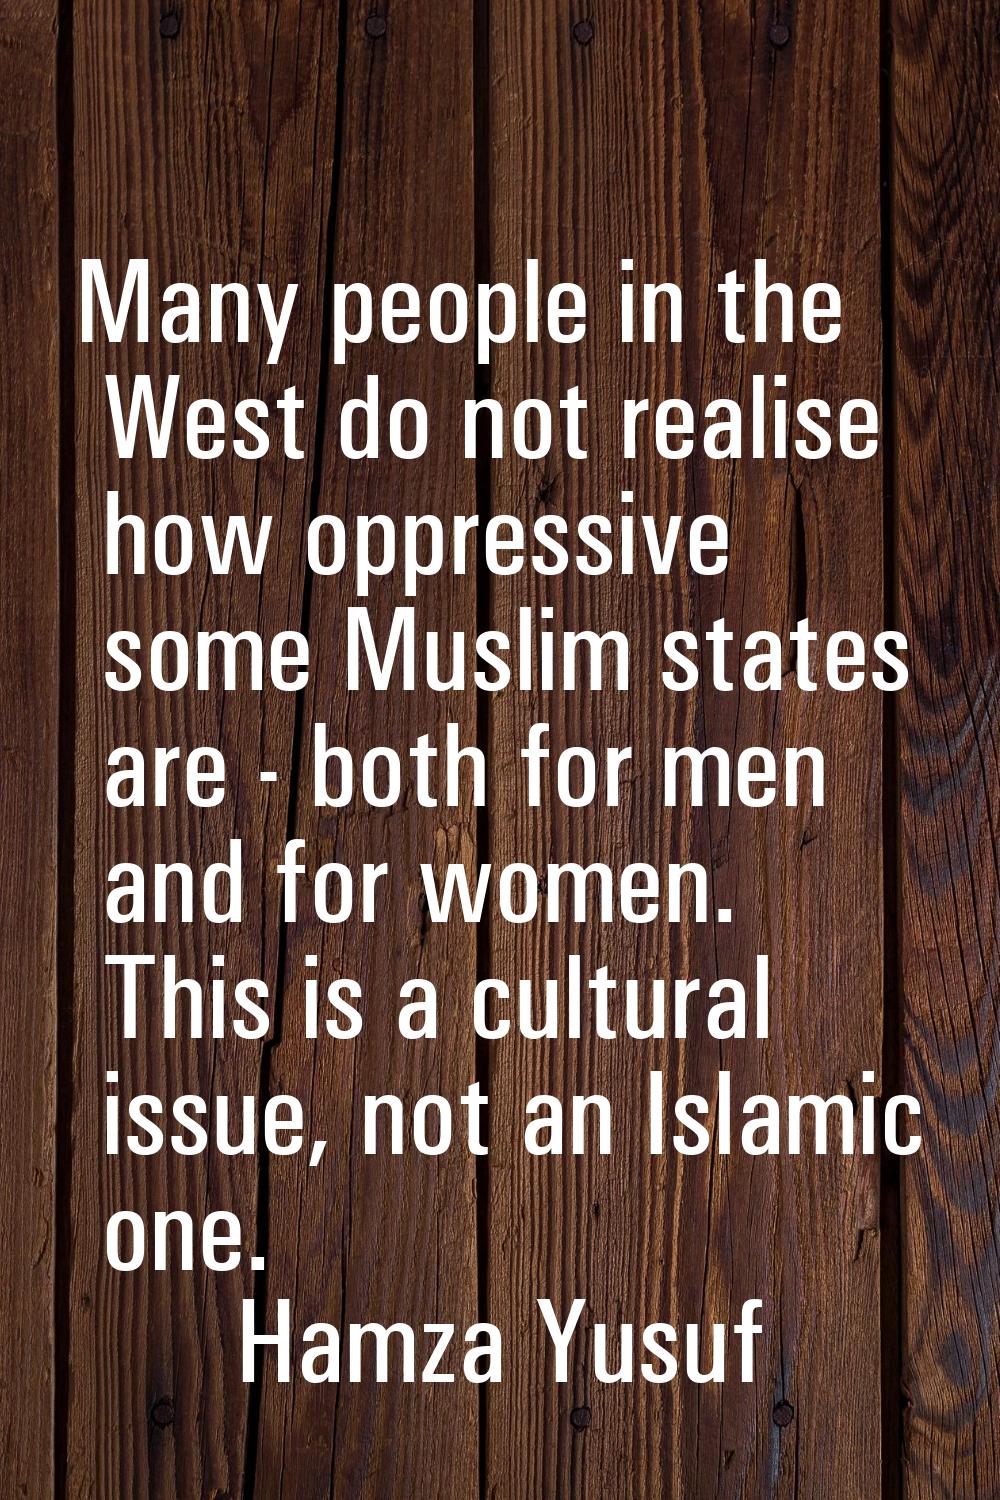 Many people in the West do not realise how oppressive some Muslim states are - both for men and for